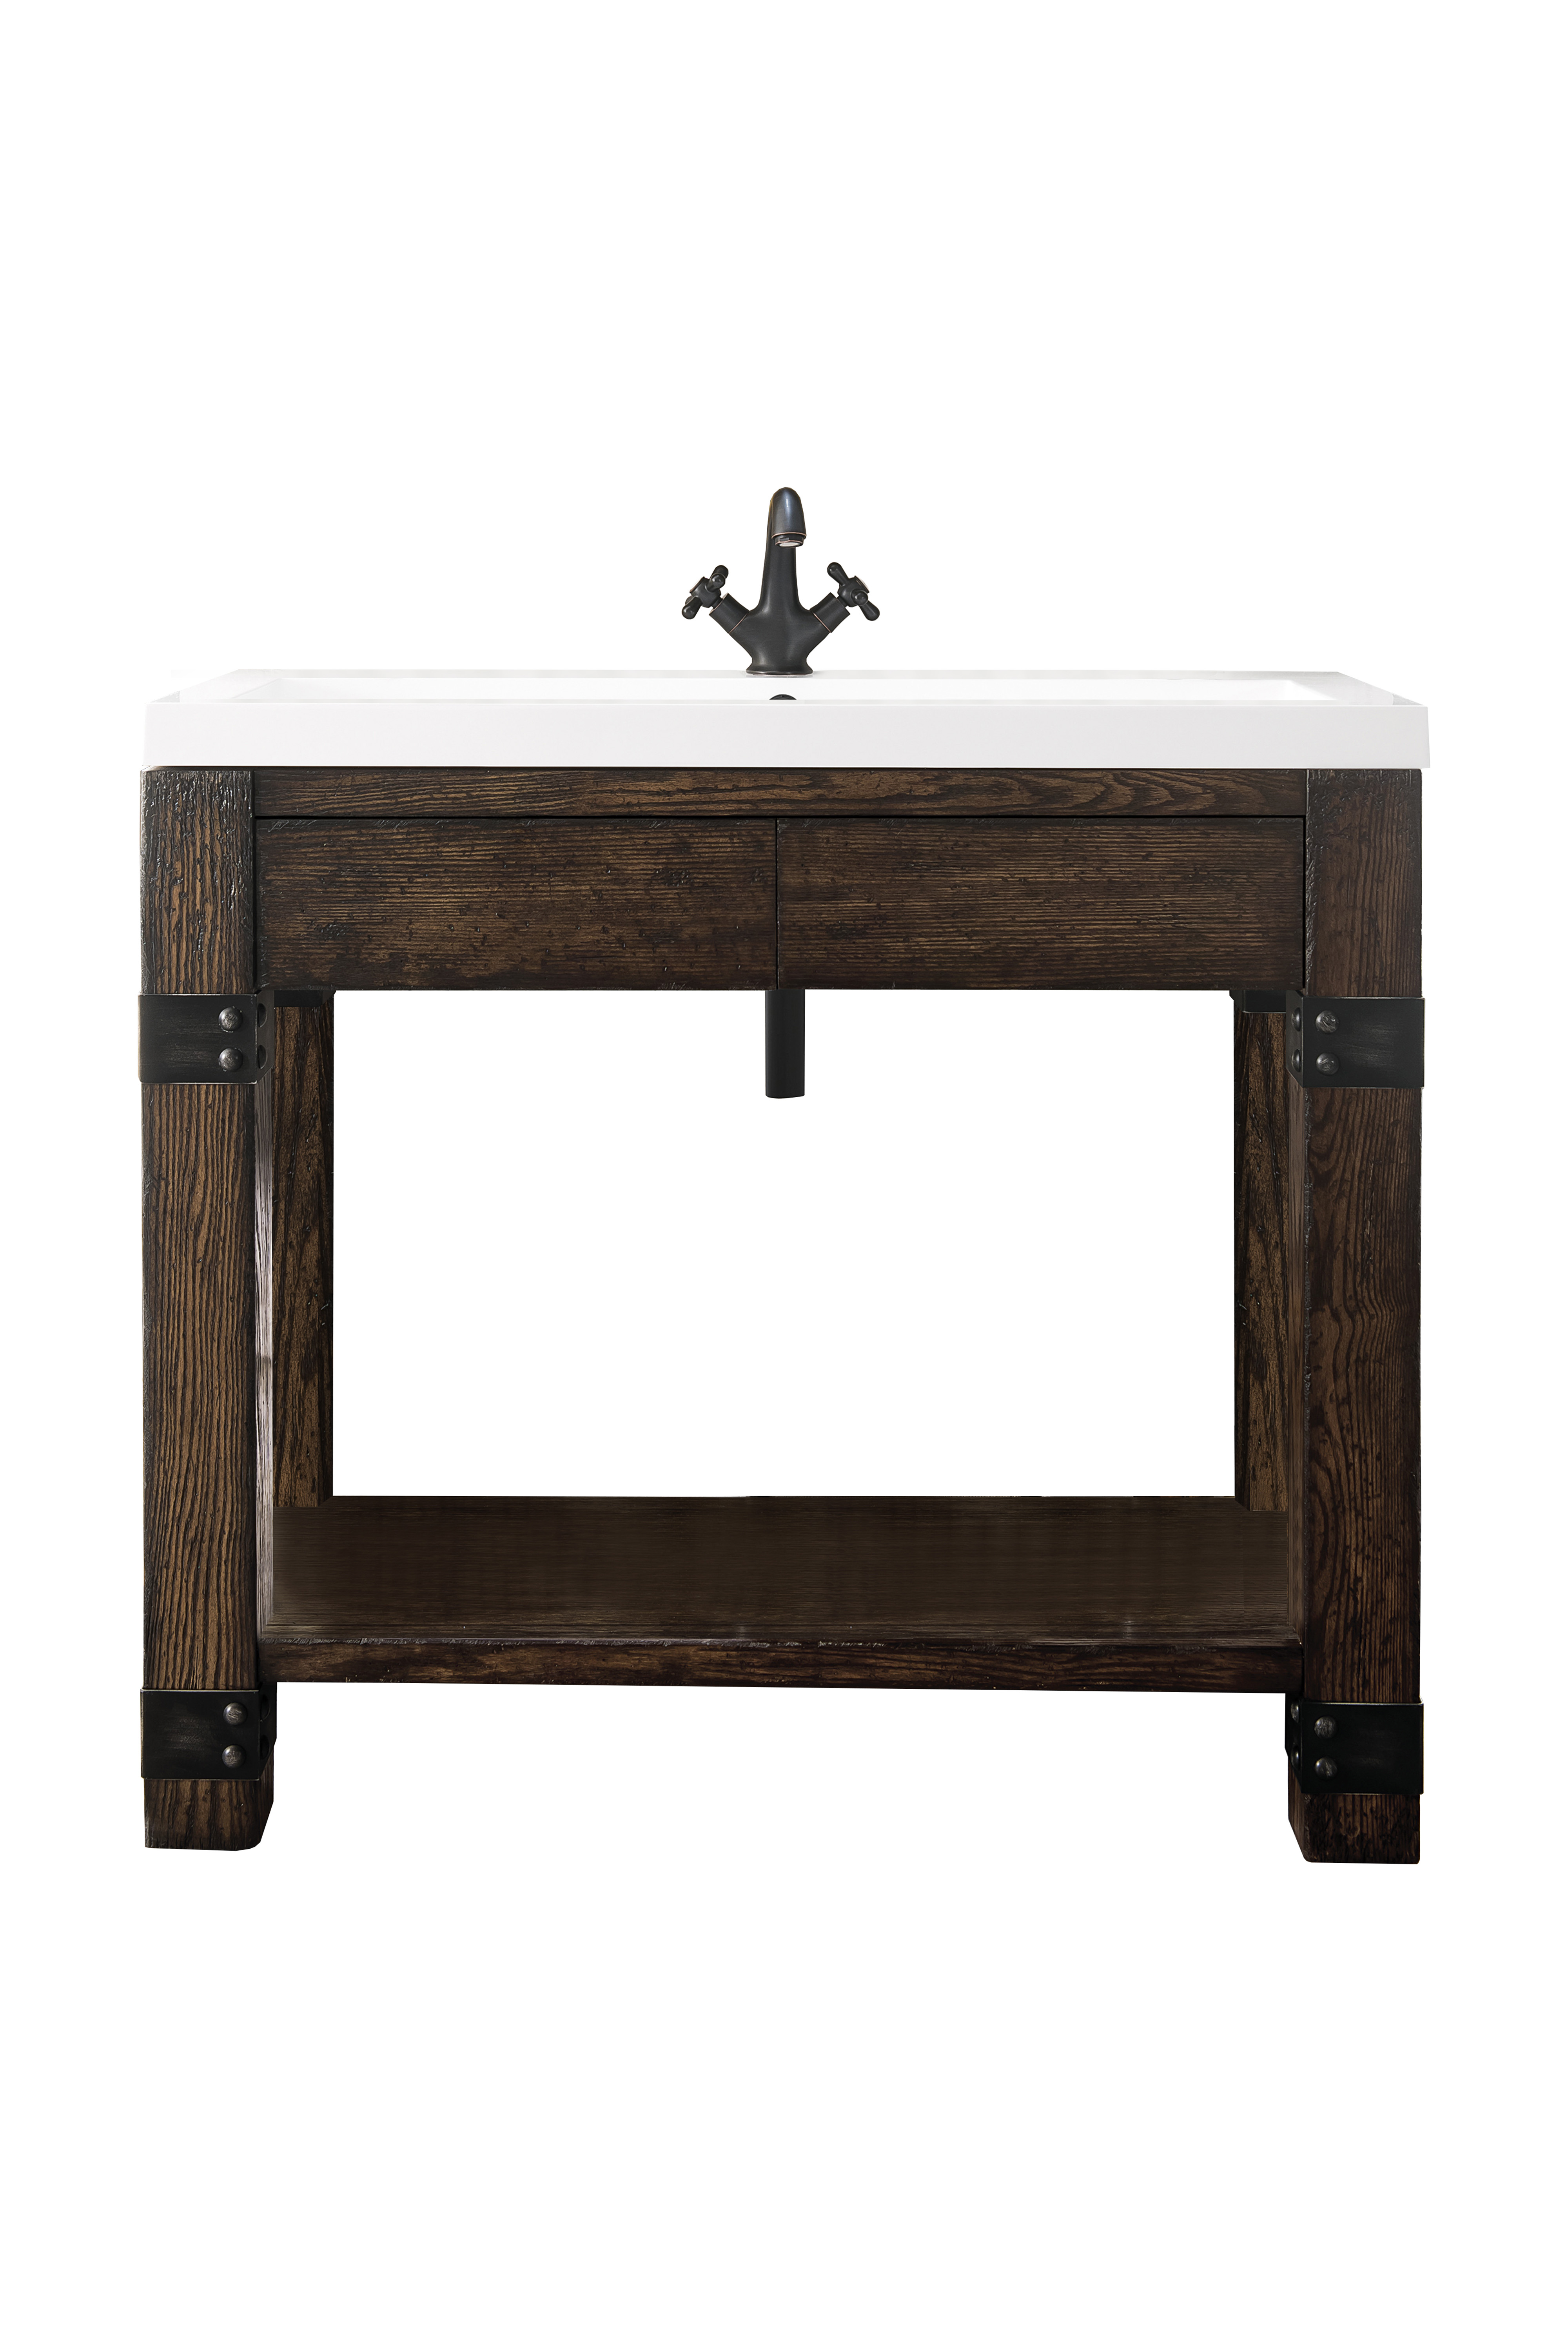 James Martin C205V39.5RSAWG Brooklyn 39.5" Wooden Sink Console, Rustic Ash w/ White Glossy Composite Countertop - Click Image to Close